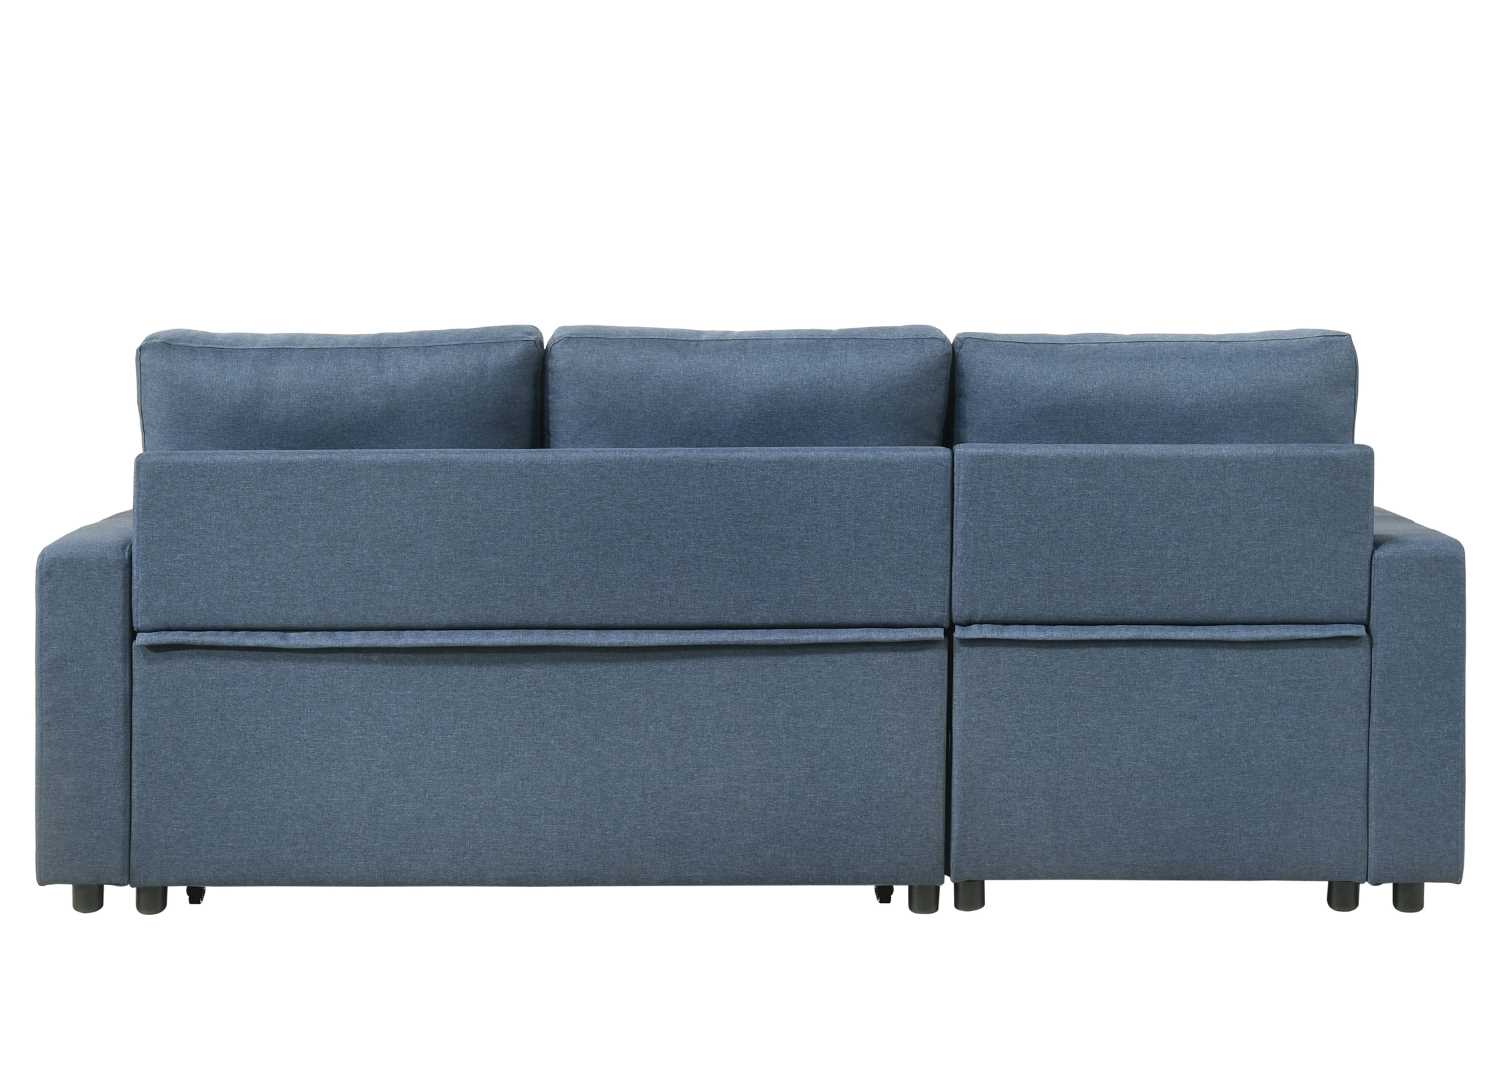 Faber Reversible Sectional Sofa Bed with Pull-out Sleeper and Storage Chaise Blue 99996